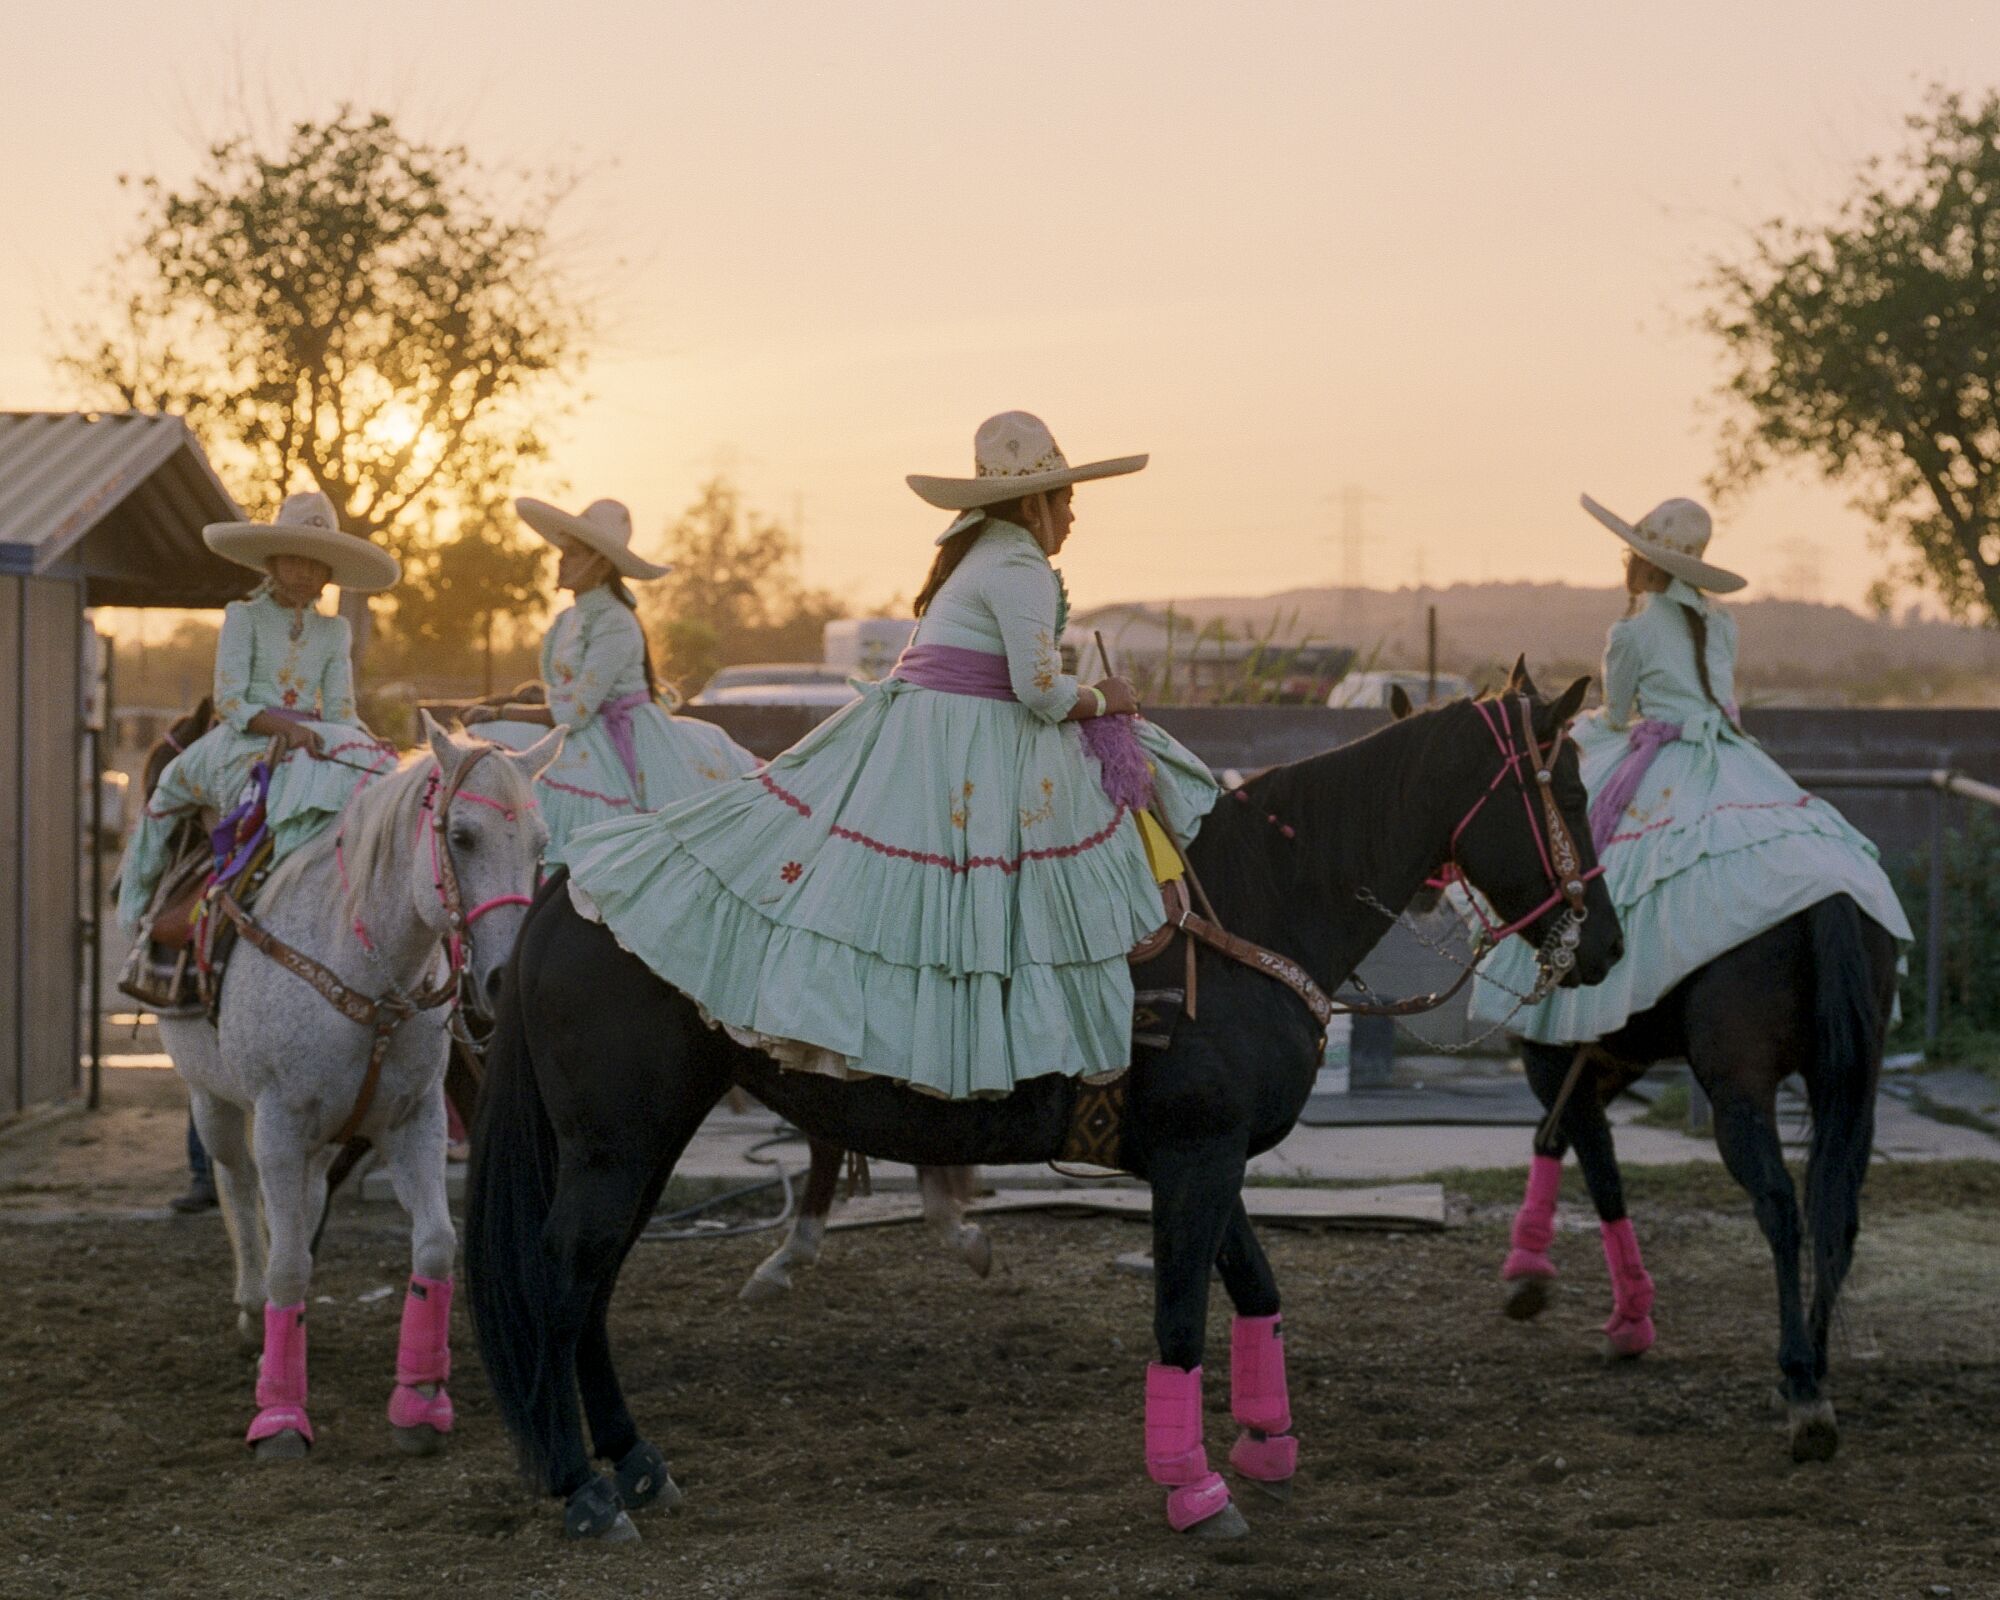 A group of women in blue dresses sits on horses during sunset.